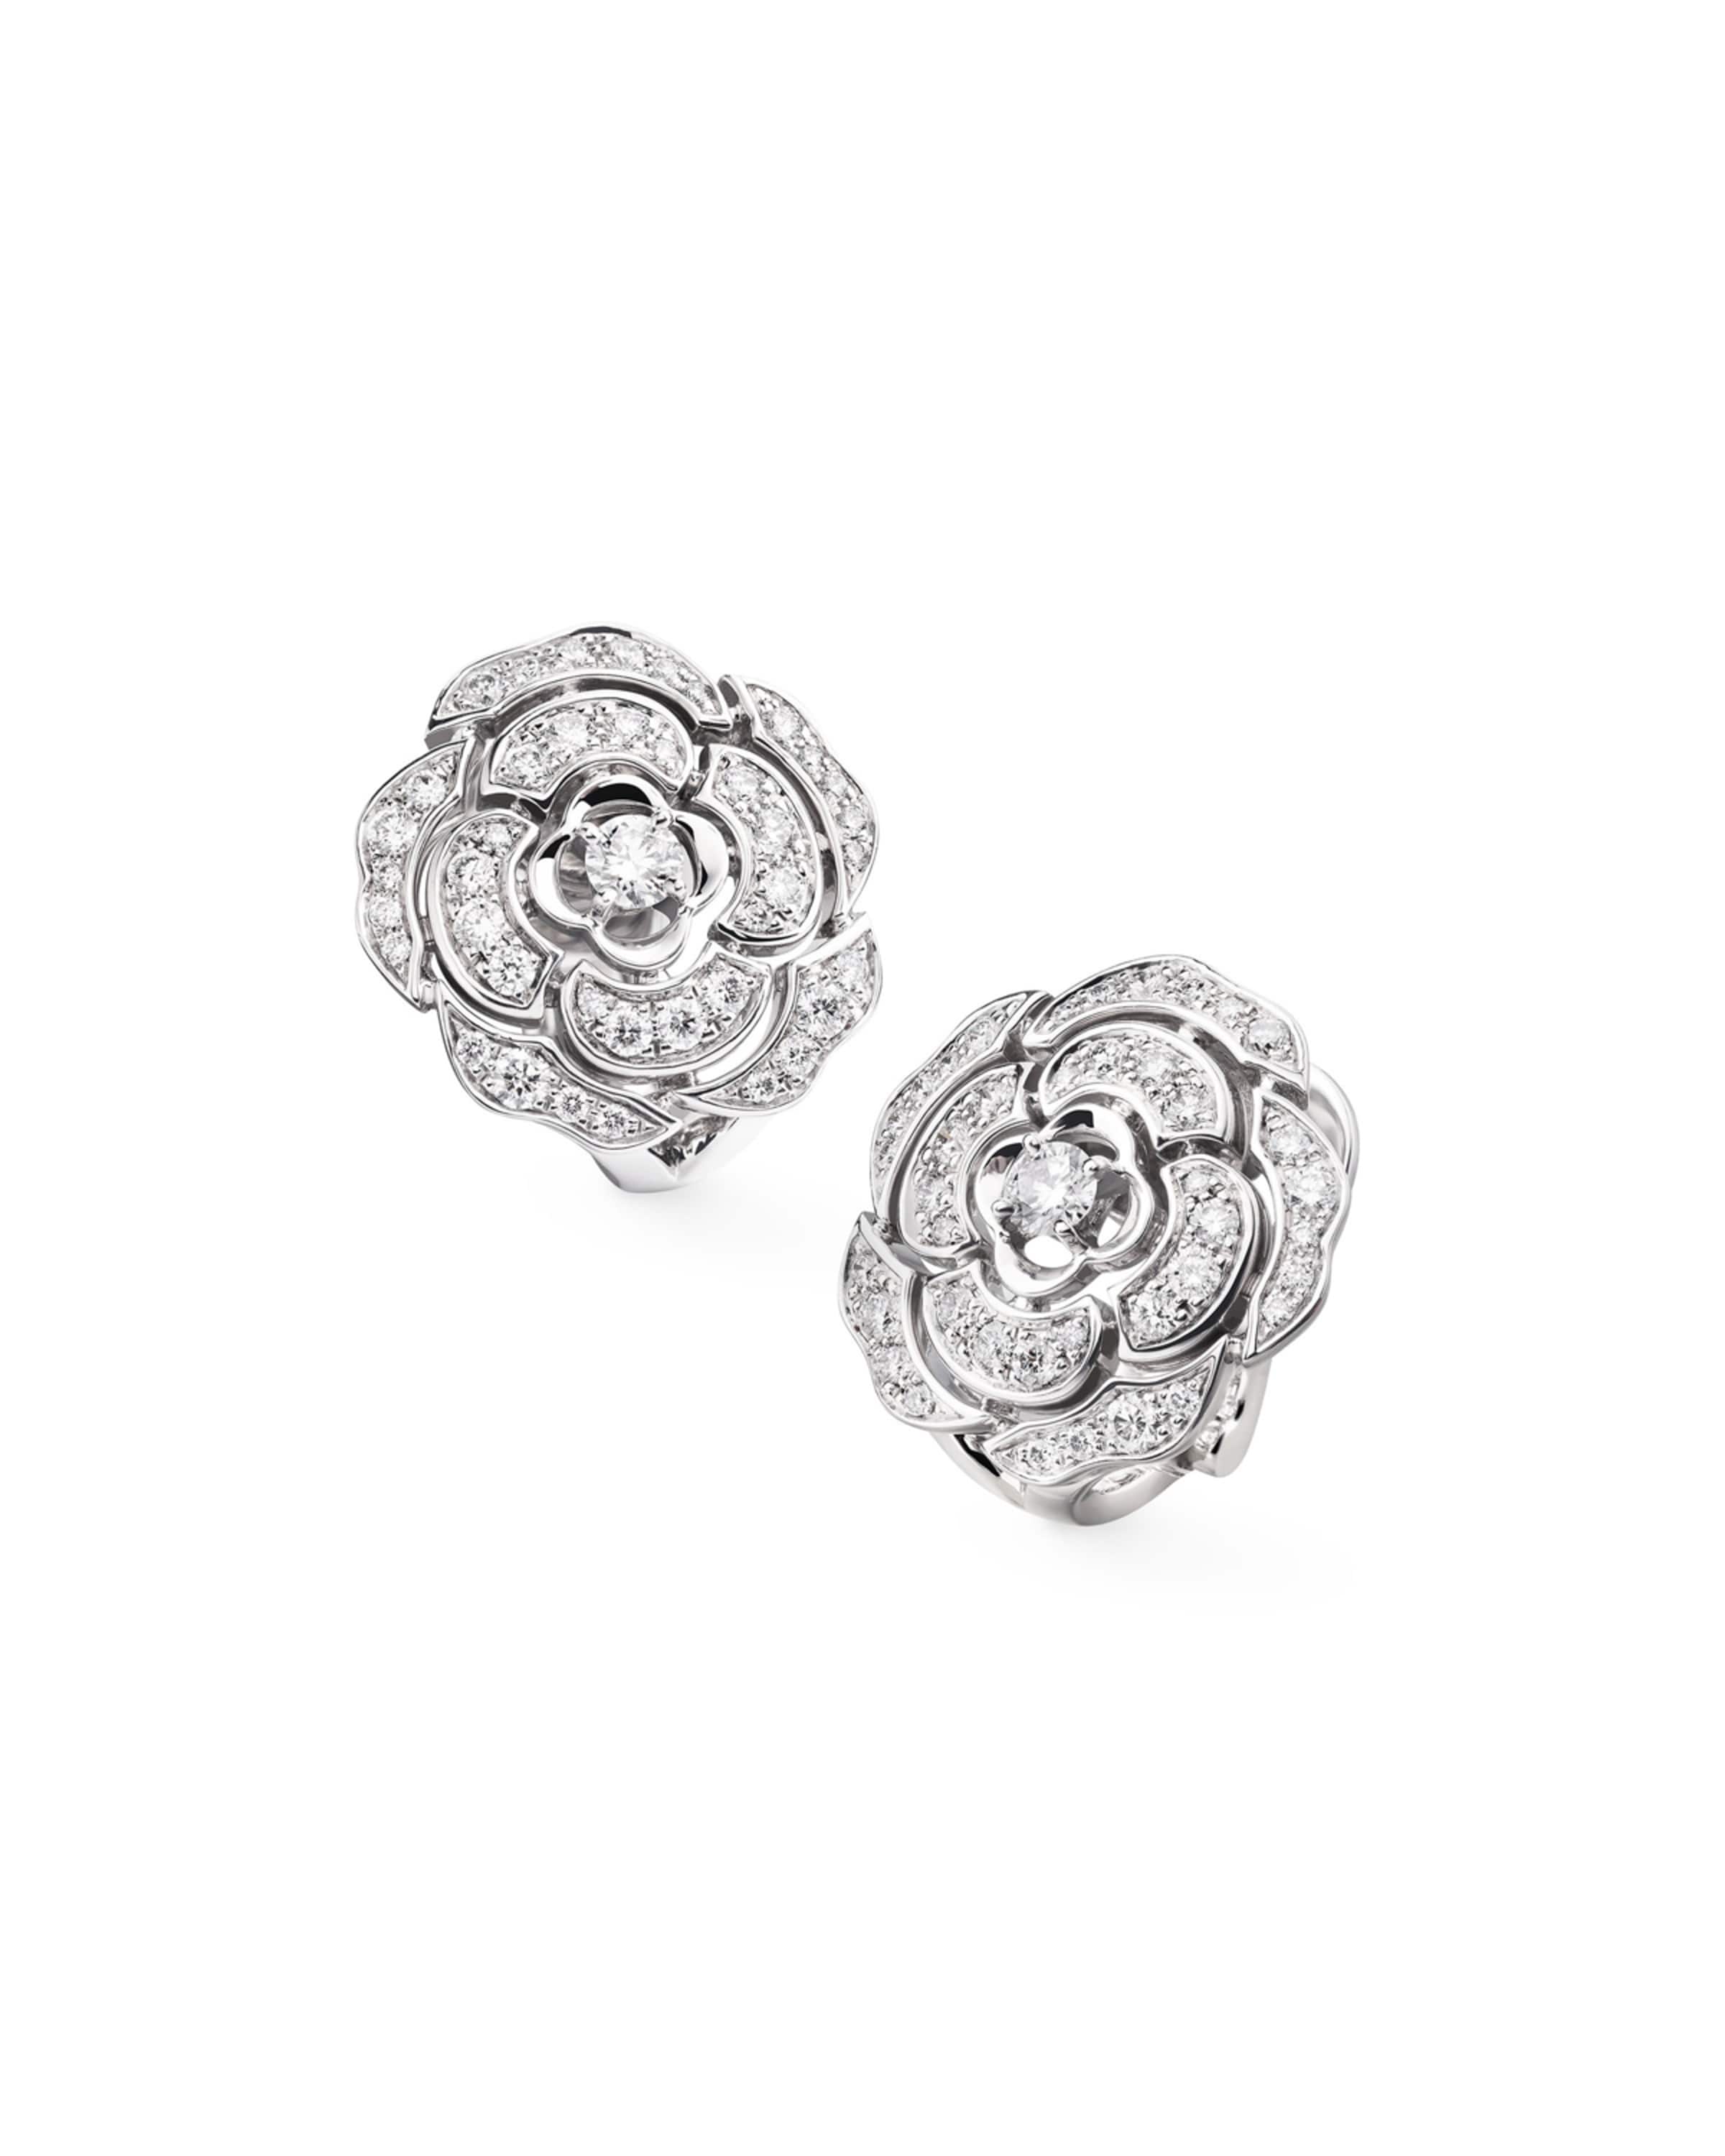 Chanel Earrings at Neiman Marcus, Coco Chanel's iconic jewelry on display  at Neiman , Jewellery N